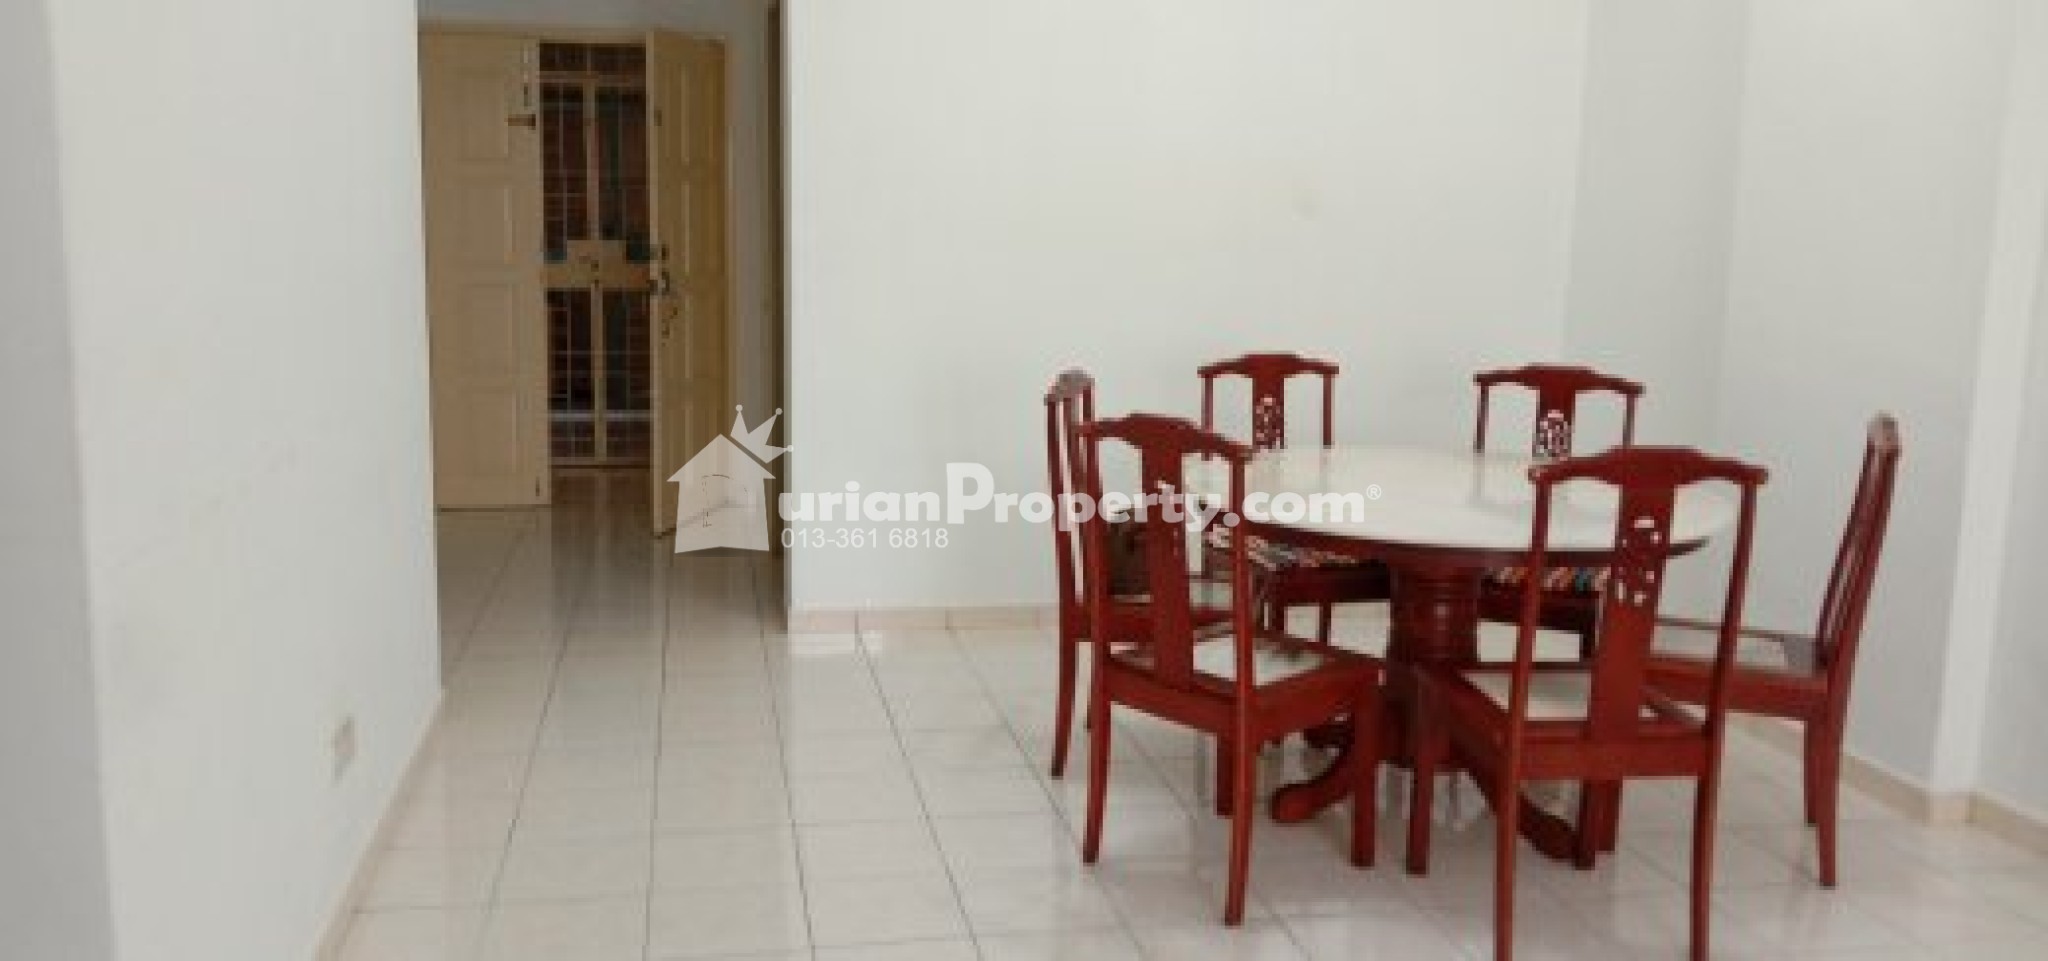 Apartment For Sale at Jalil Damai